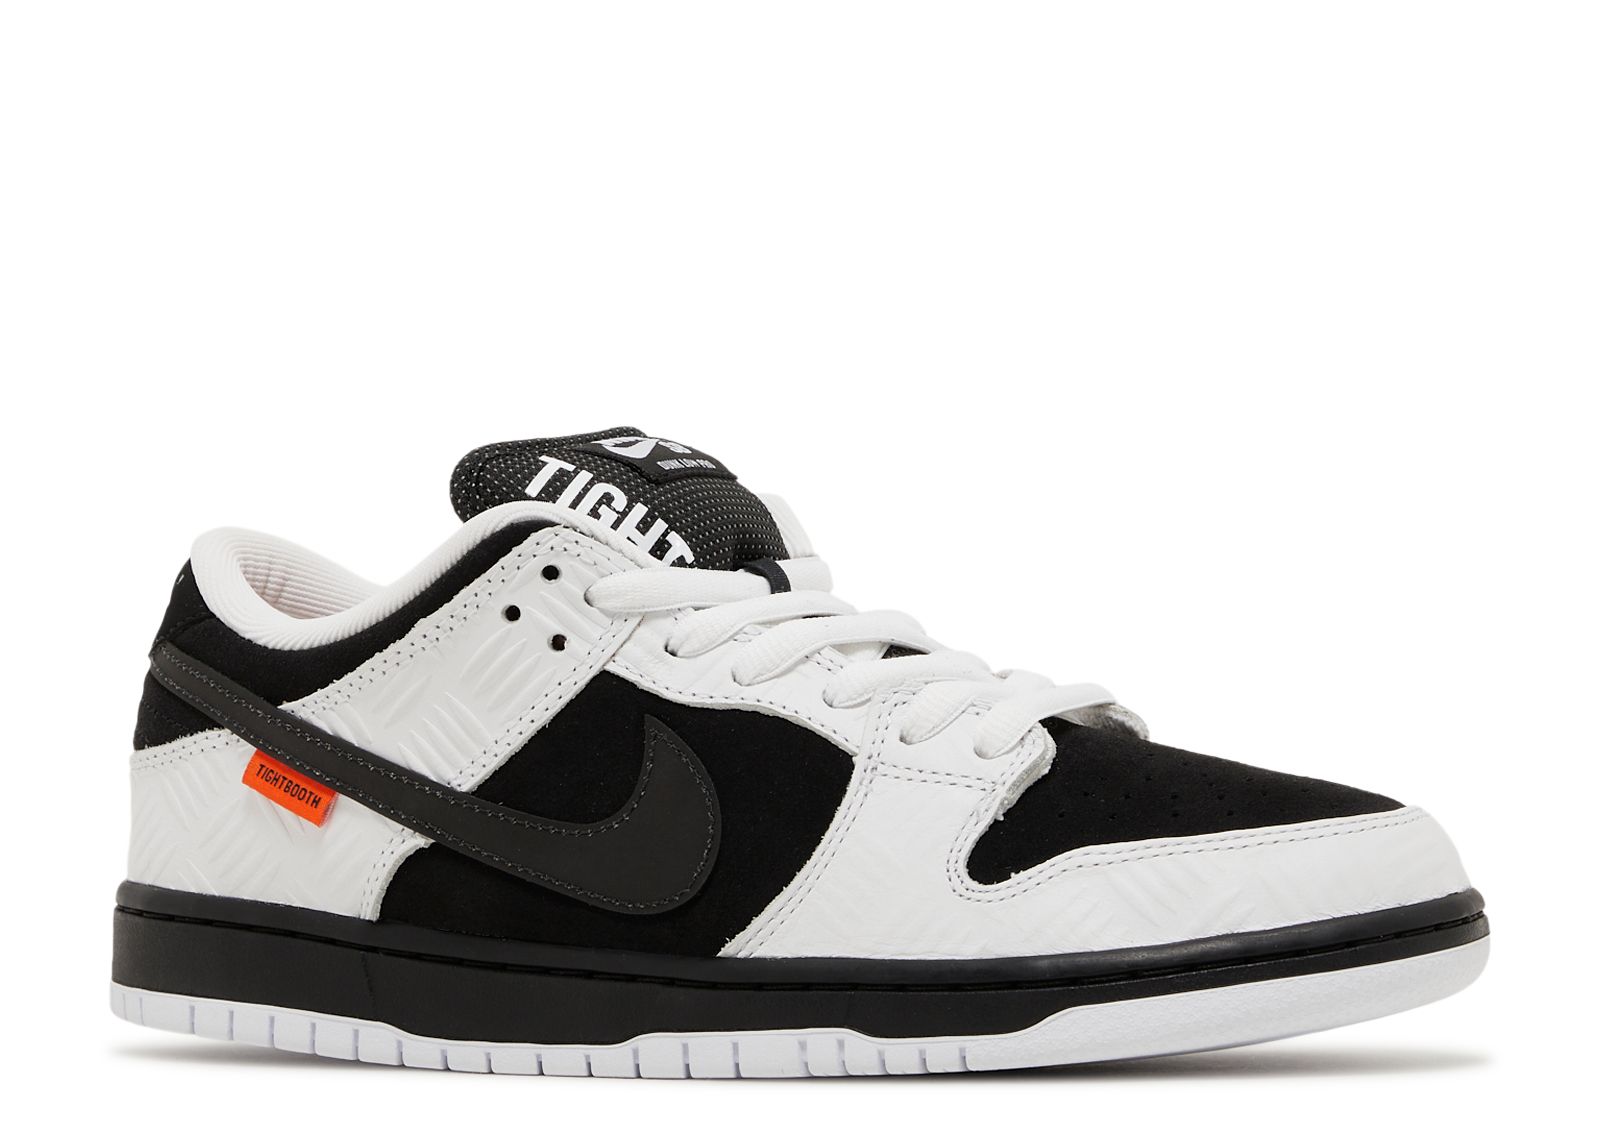 TIGHTBOOTH X Dunk Low SB - Nike - FD2629 100 - white/black/safety ...